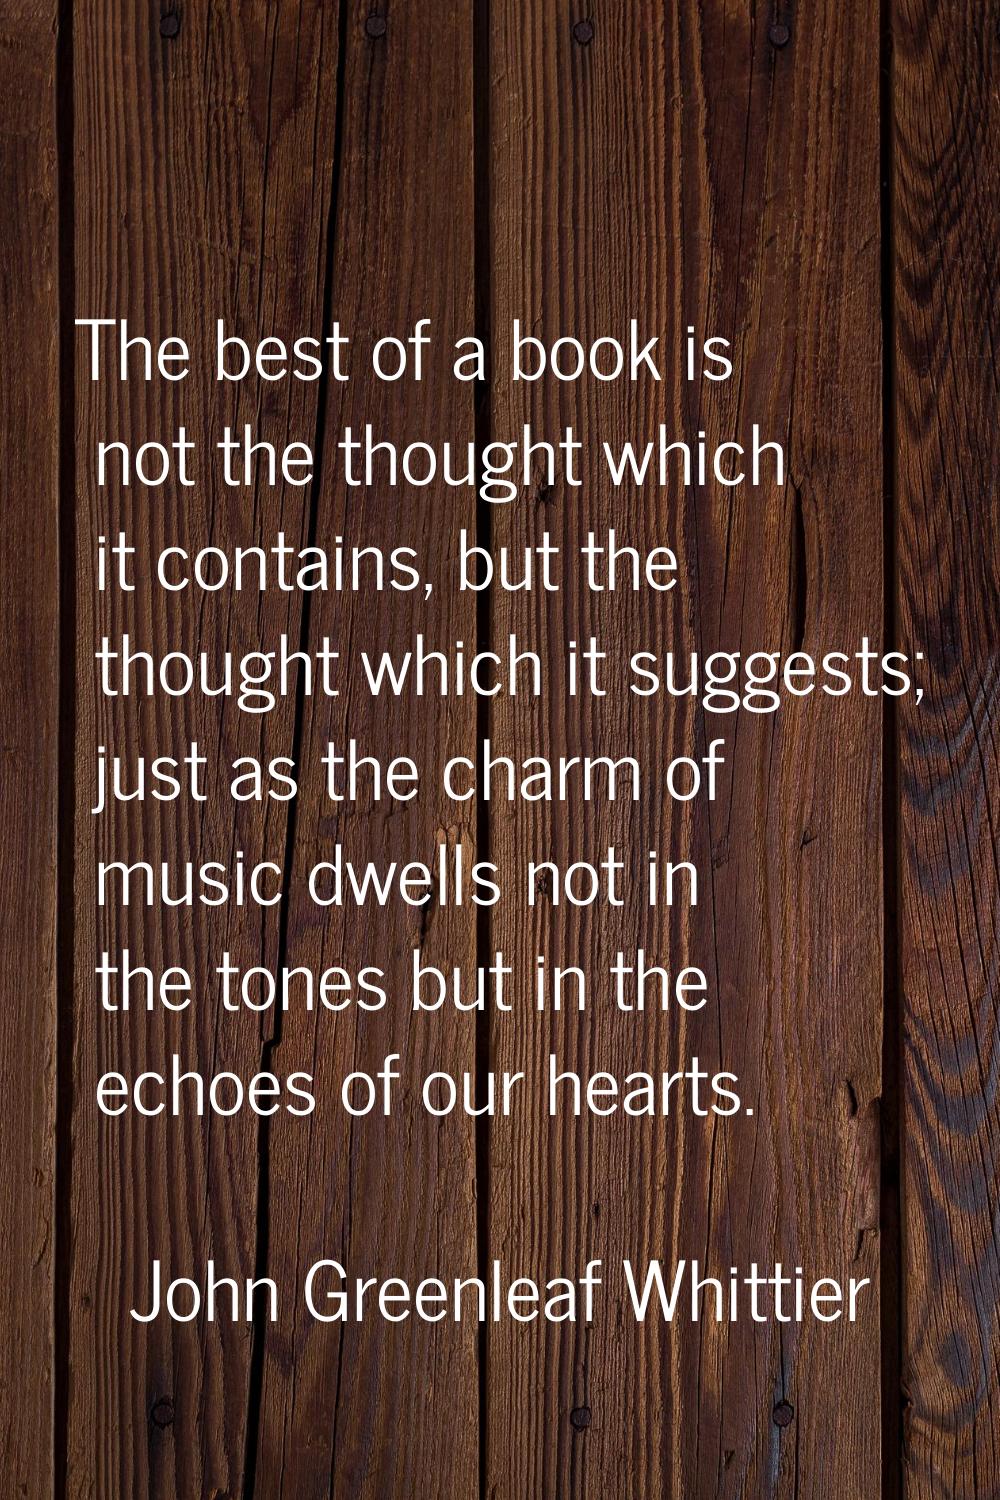 The best of a book is not the thought which it contains, but the thought which it suggests; just as